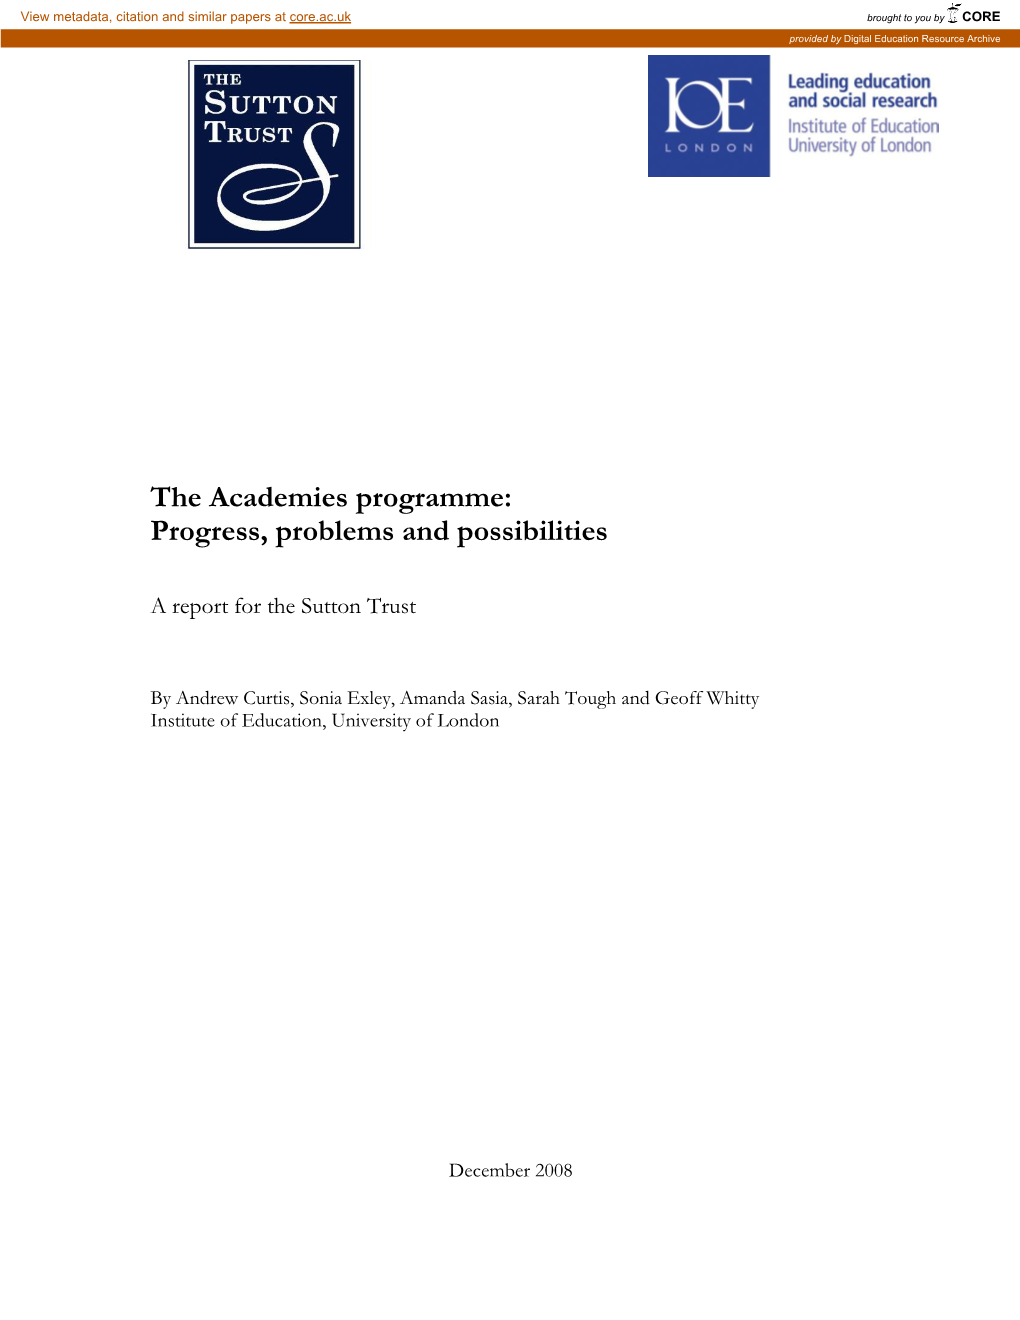 An Evaluation of the Academies Programme